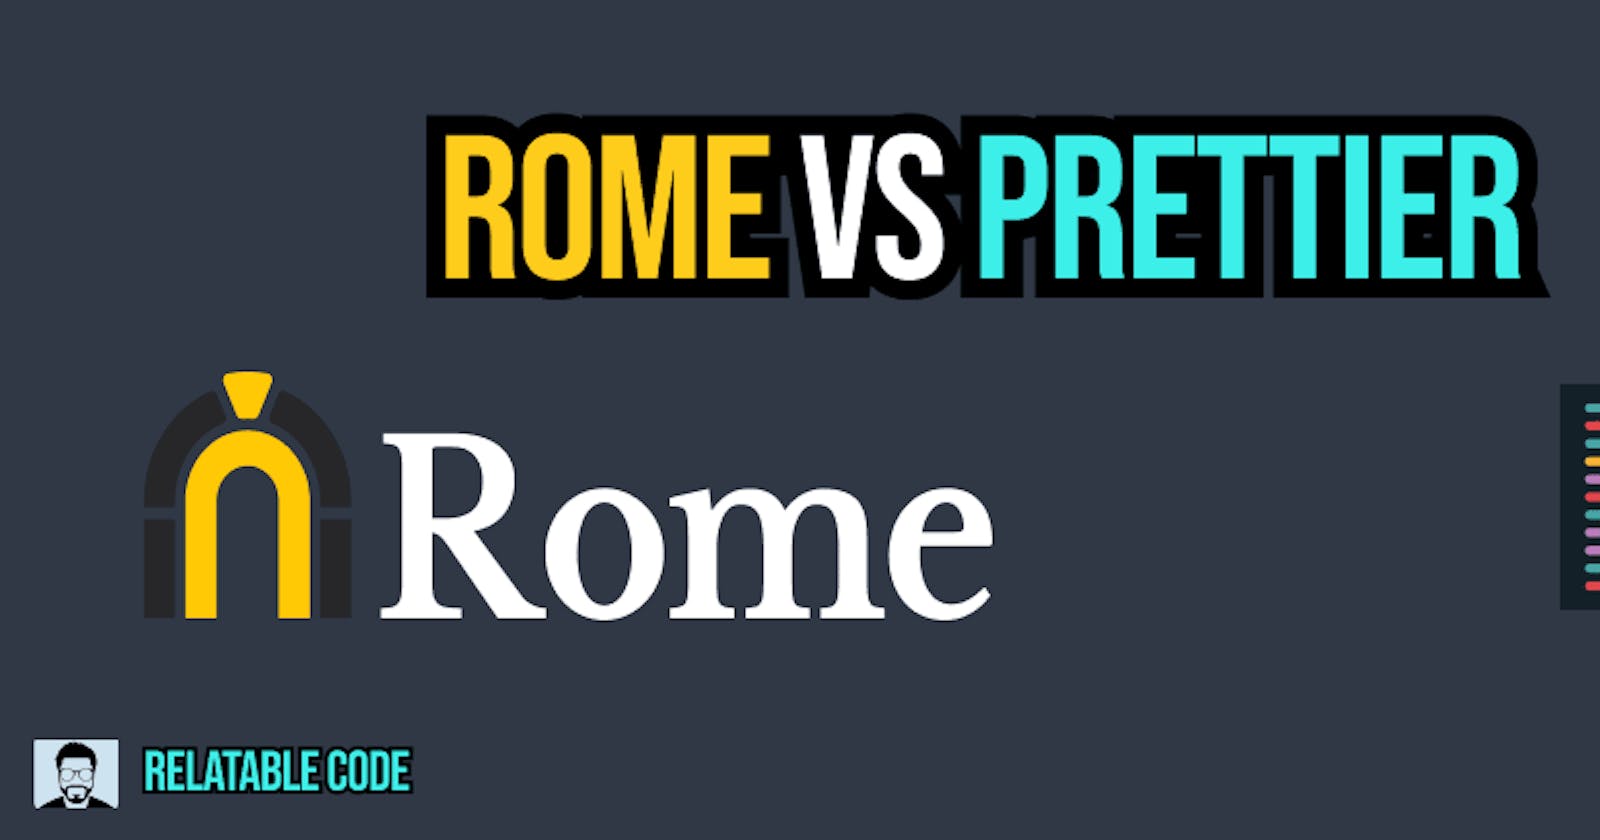 Rome vs Prettier. Trying out the new formatter on the block